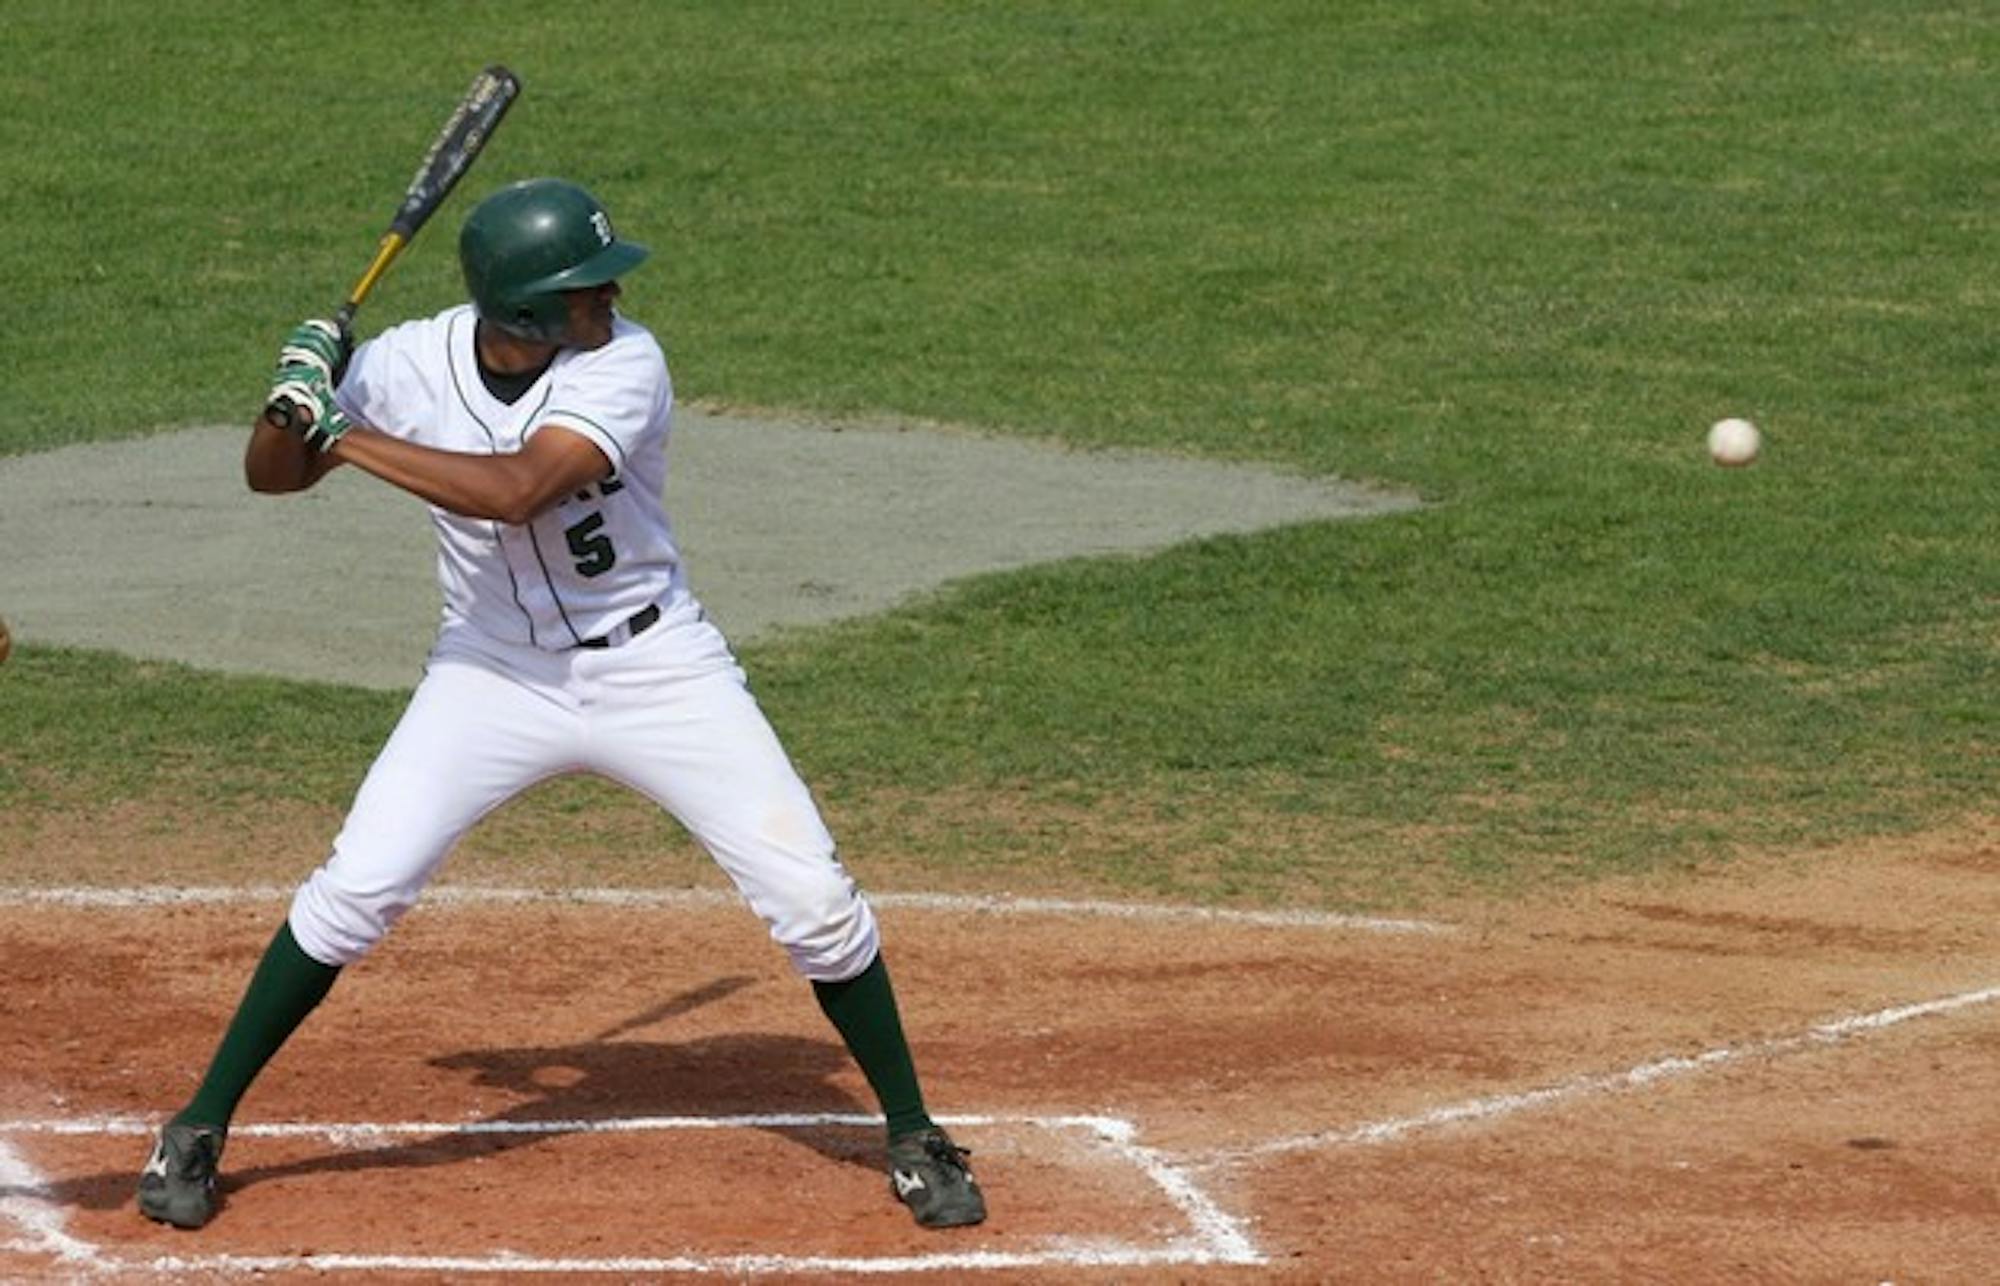 Damon Wright '08 helped keep the Big Green alive in the tenth inning, connecting on a critical one-out, RBI triple.